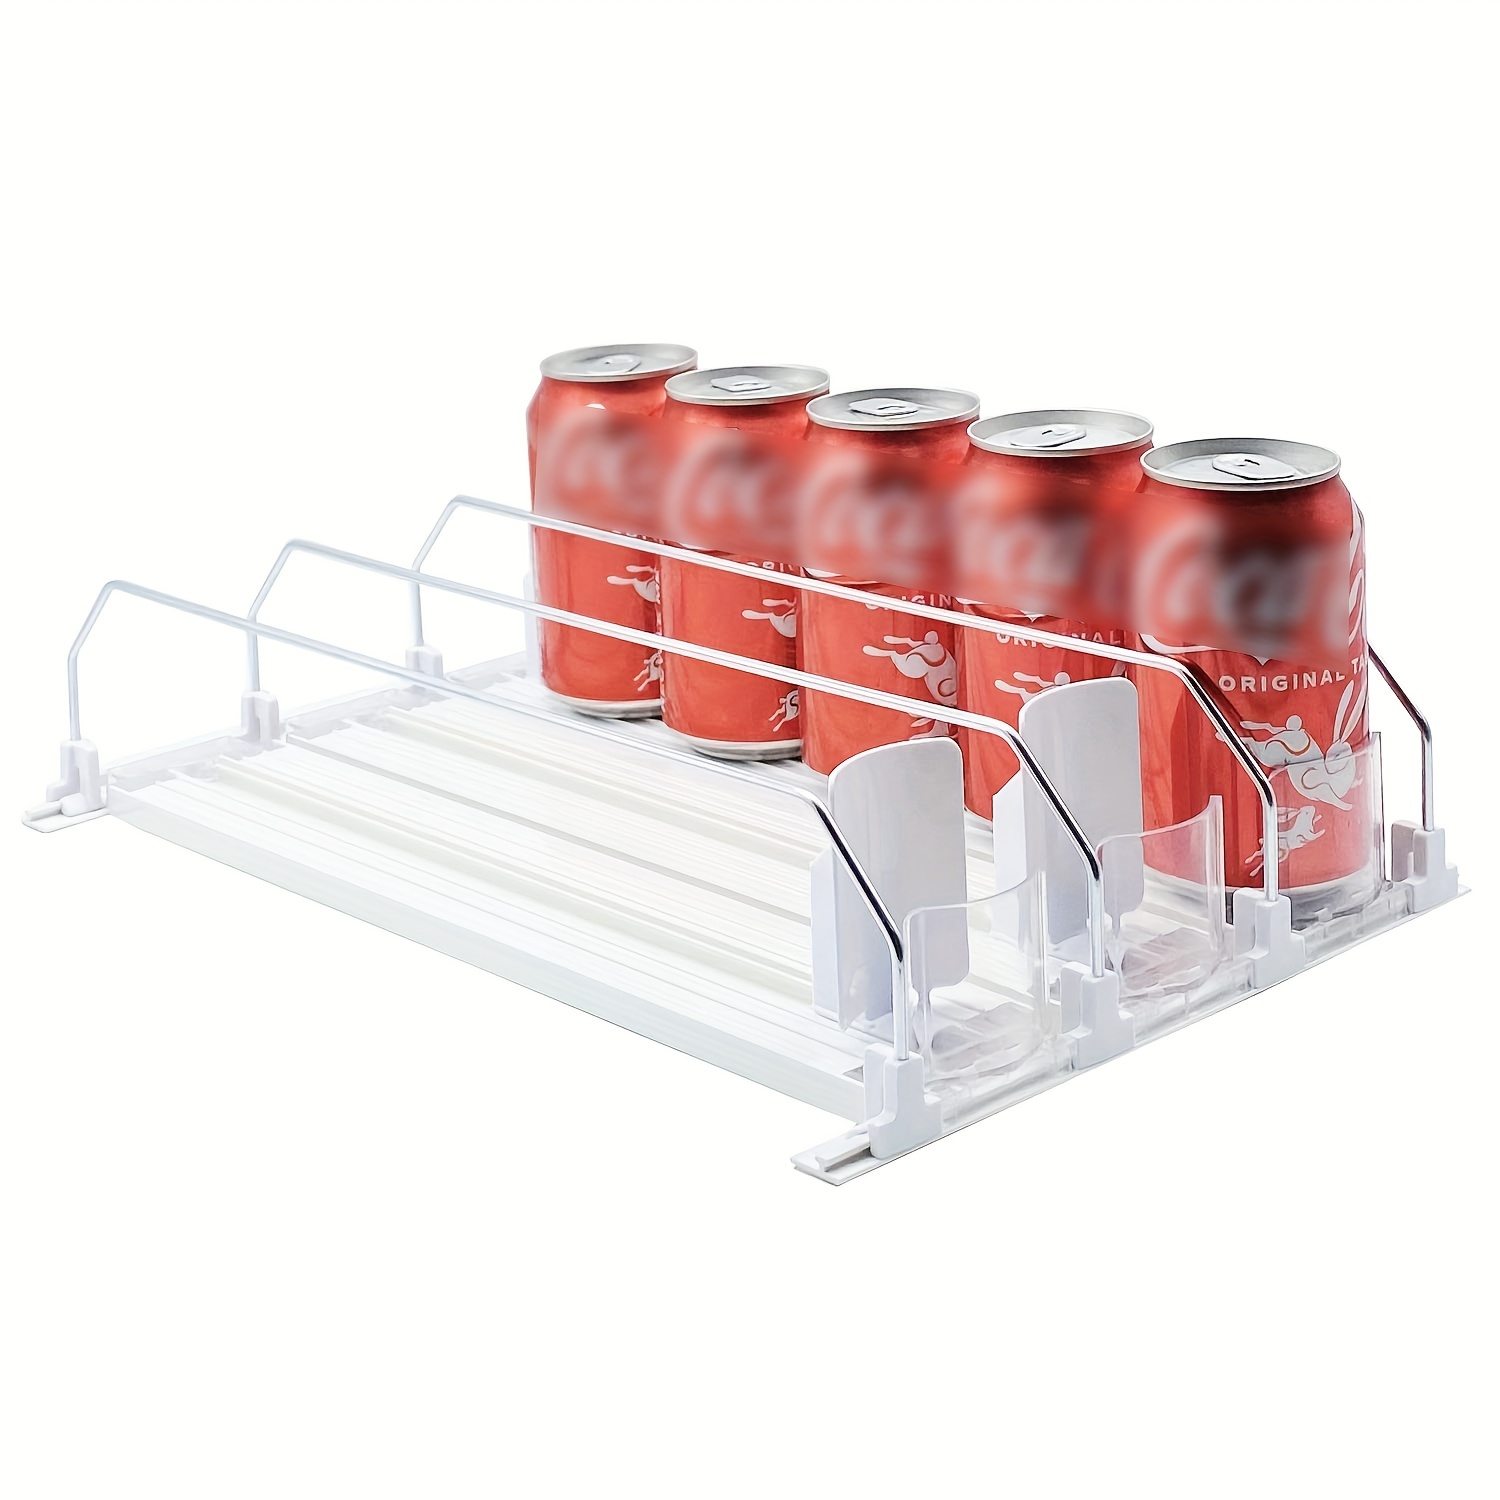 Stackable Soda Can Rack (24 Cans)- White 